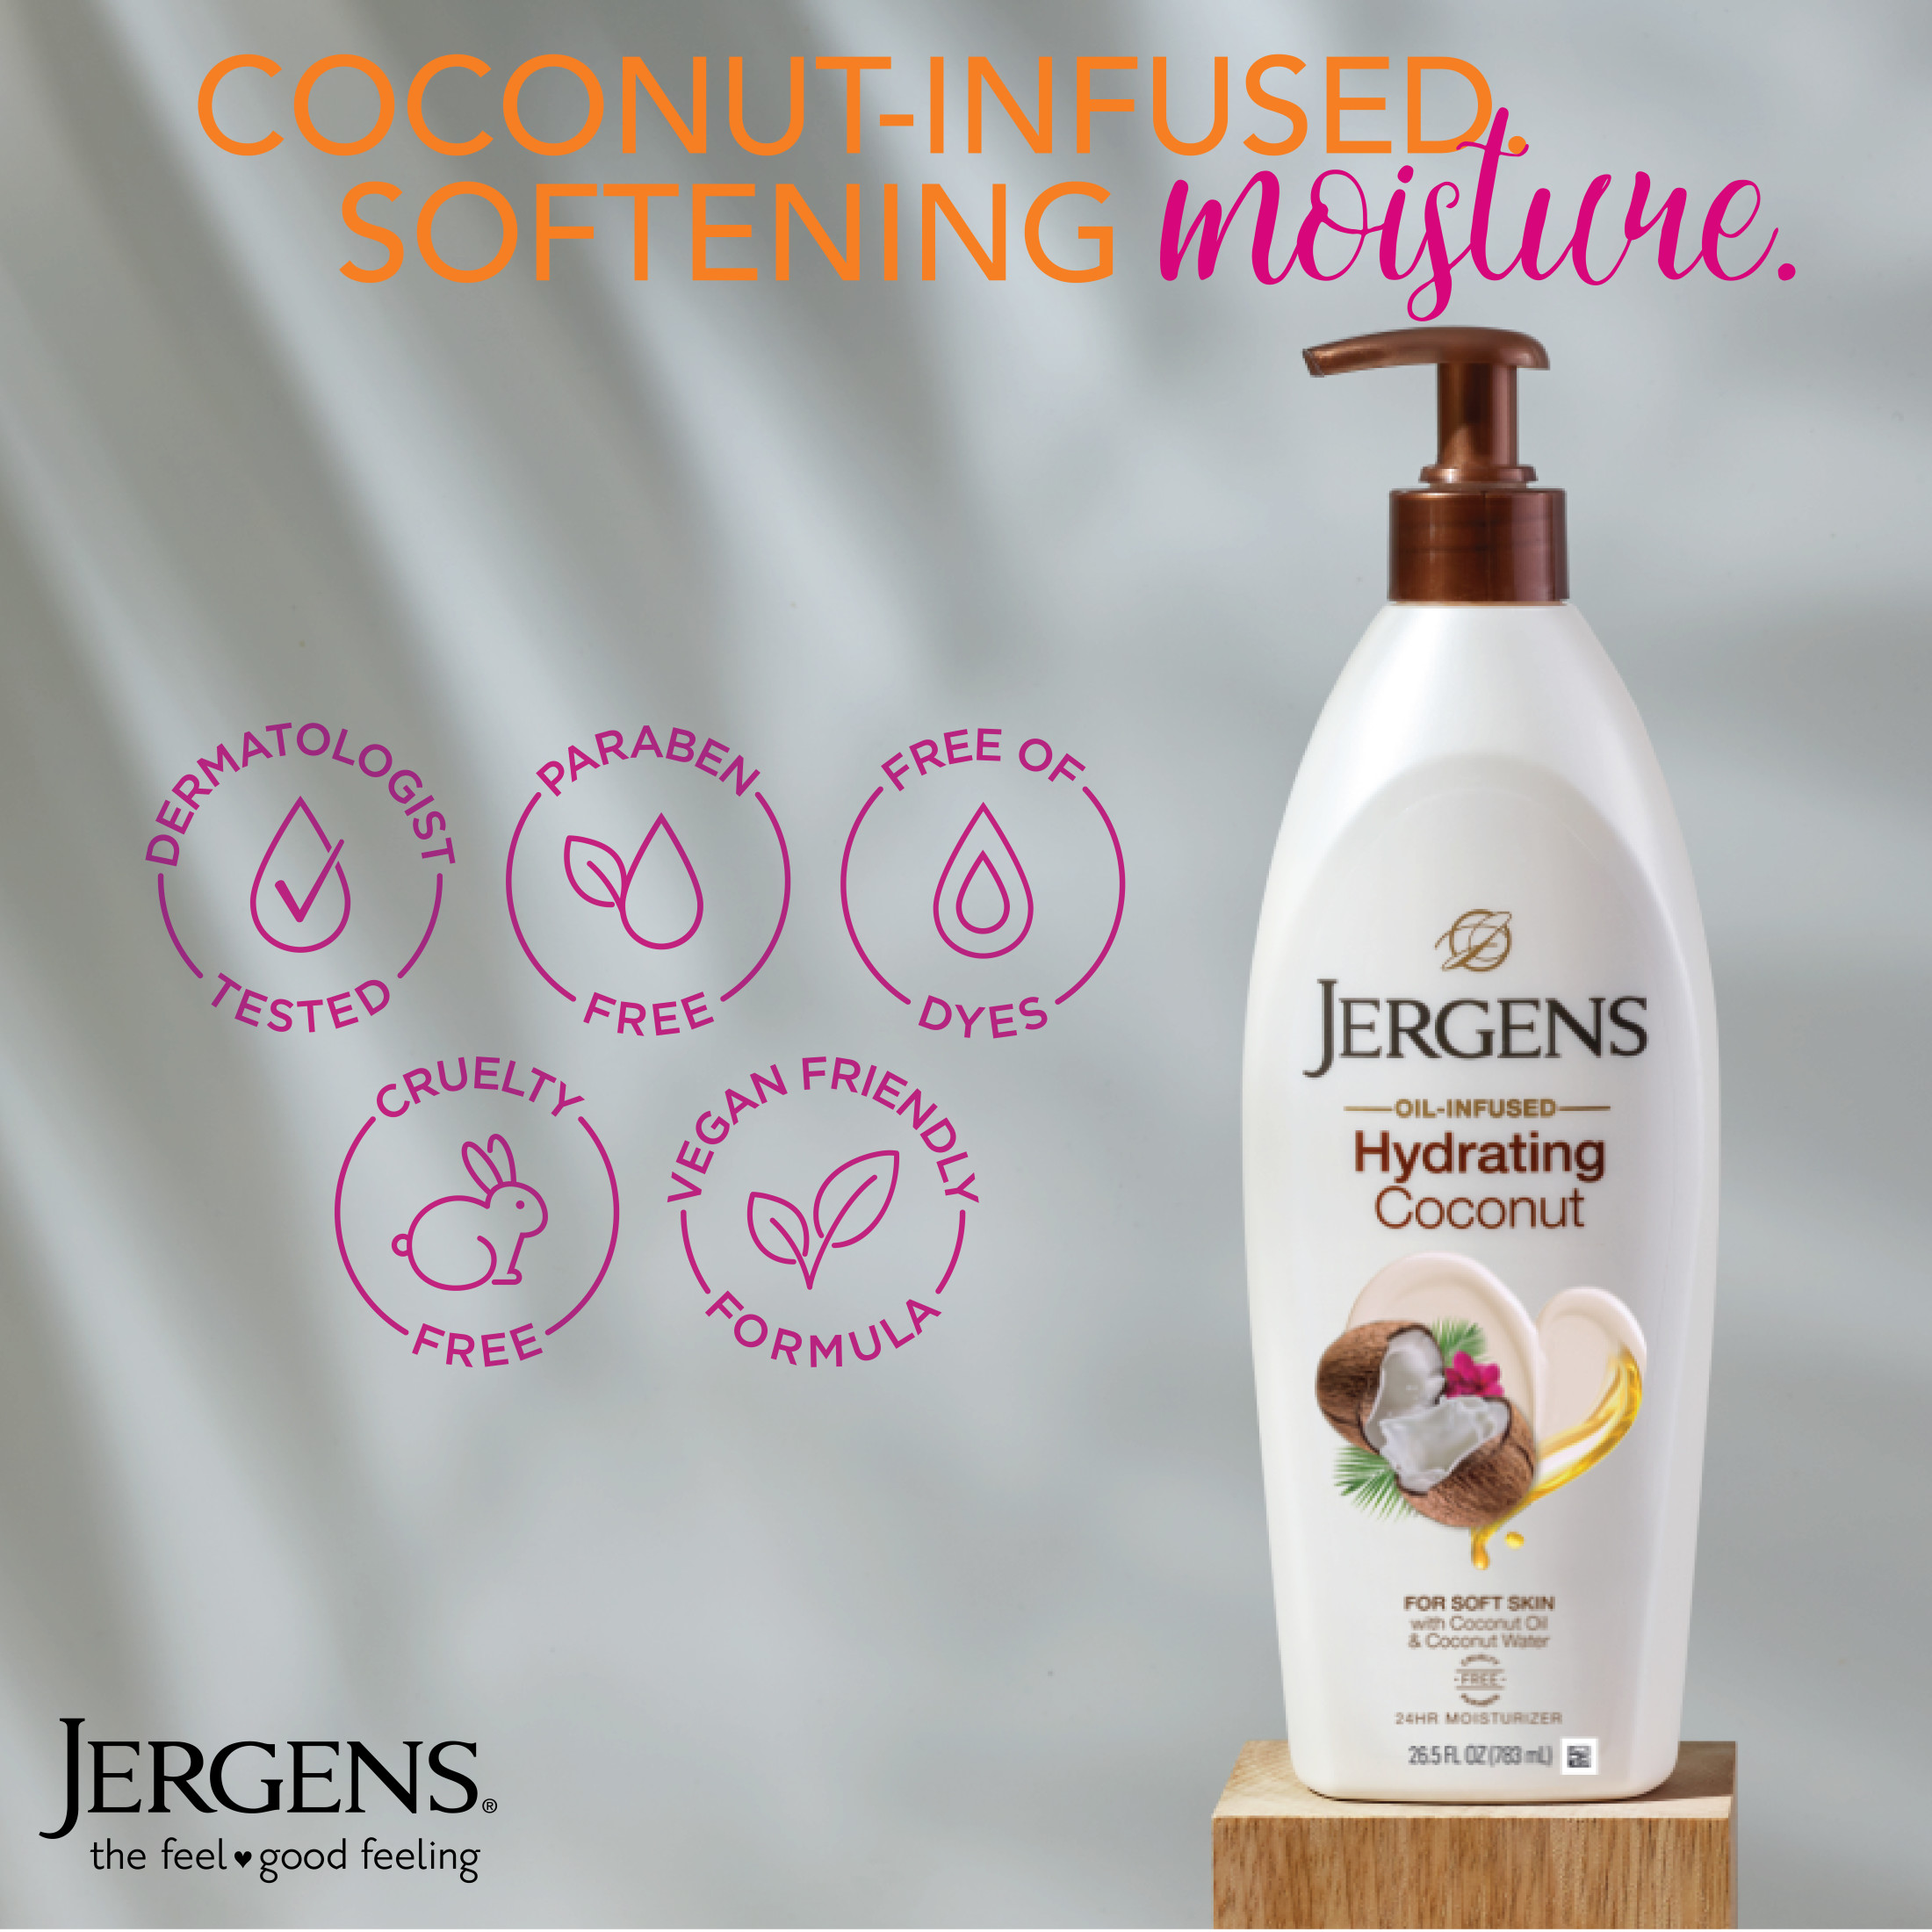 Jergens Hydrating Coconut Body Lotion, Lotion for Dry Skin, Dermatologist Tested, 26.5 Oz - image 4 of 10